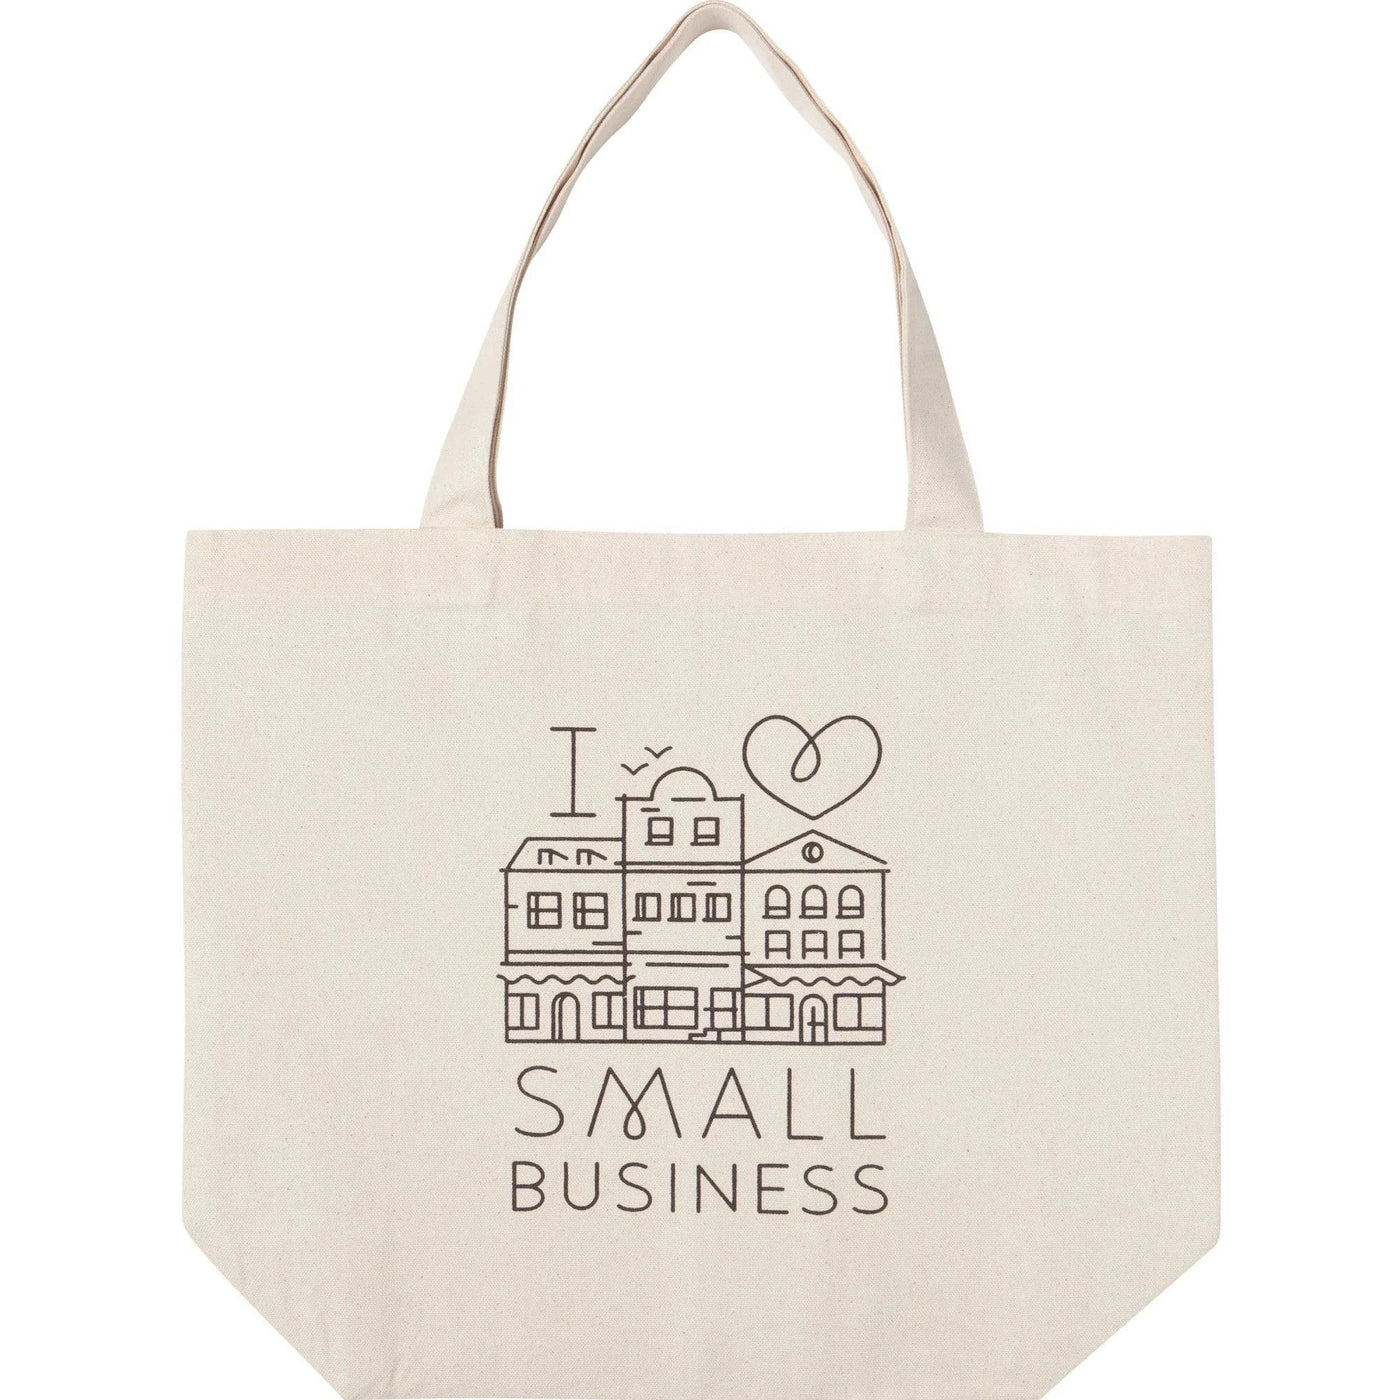 Small Business Tote Bag - The Local Space